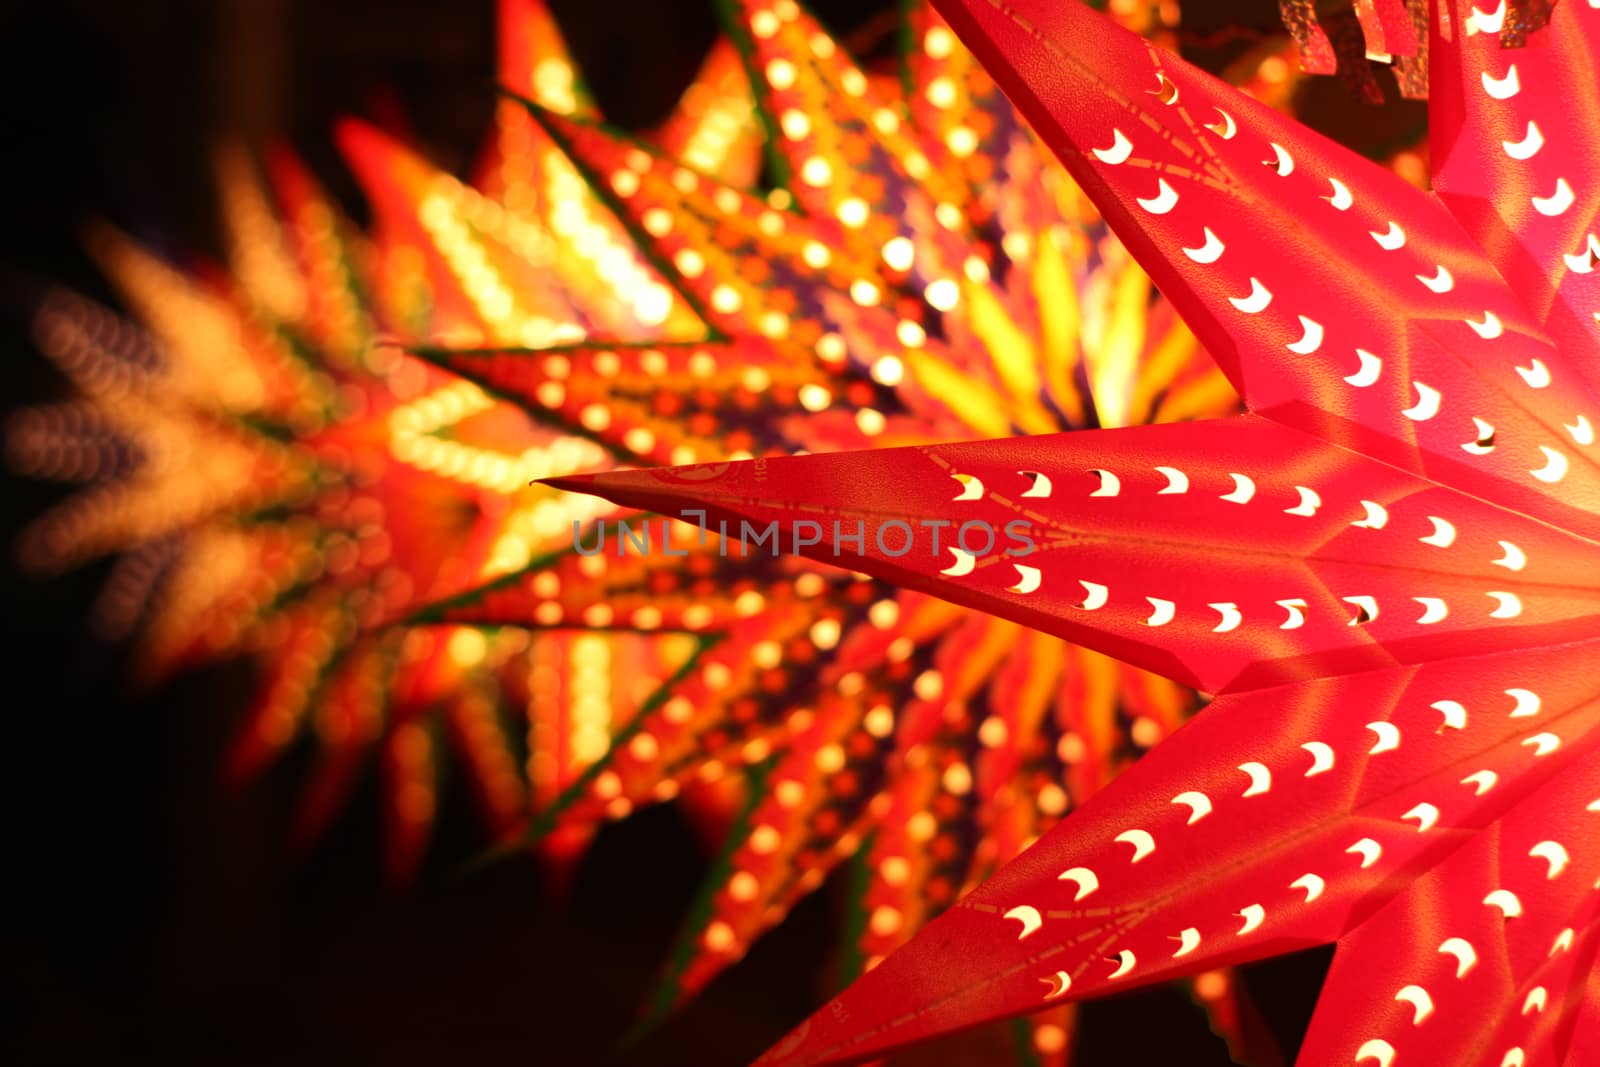 Colorful Star shaped Lanterns for sale for Diwali and Christmas festivals, in India